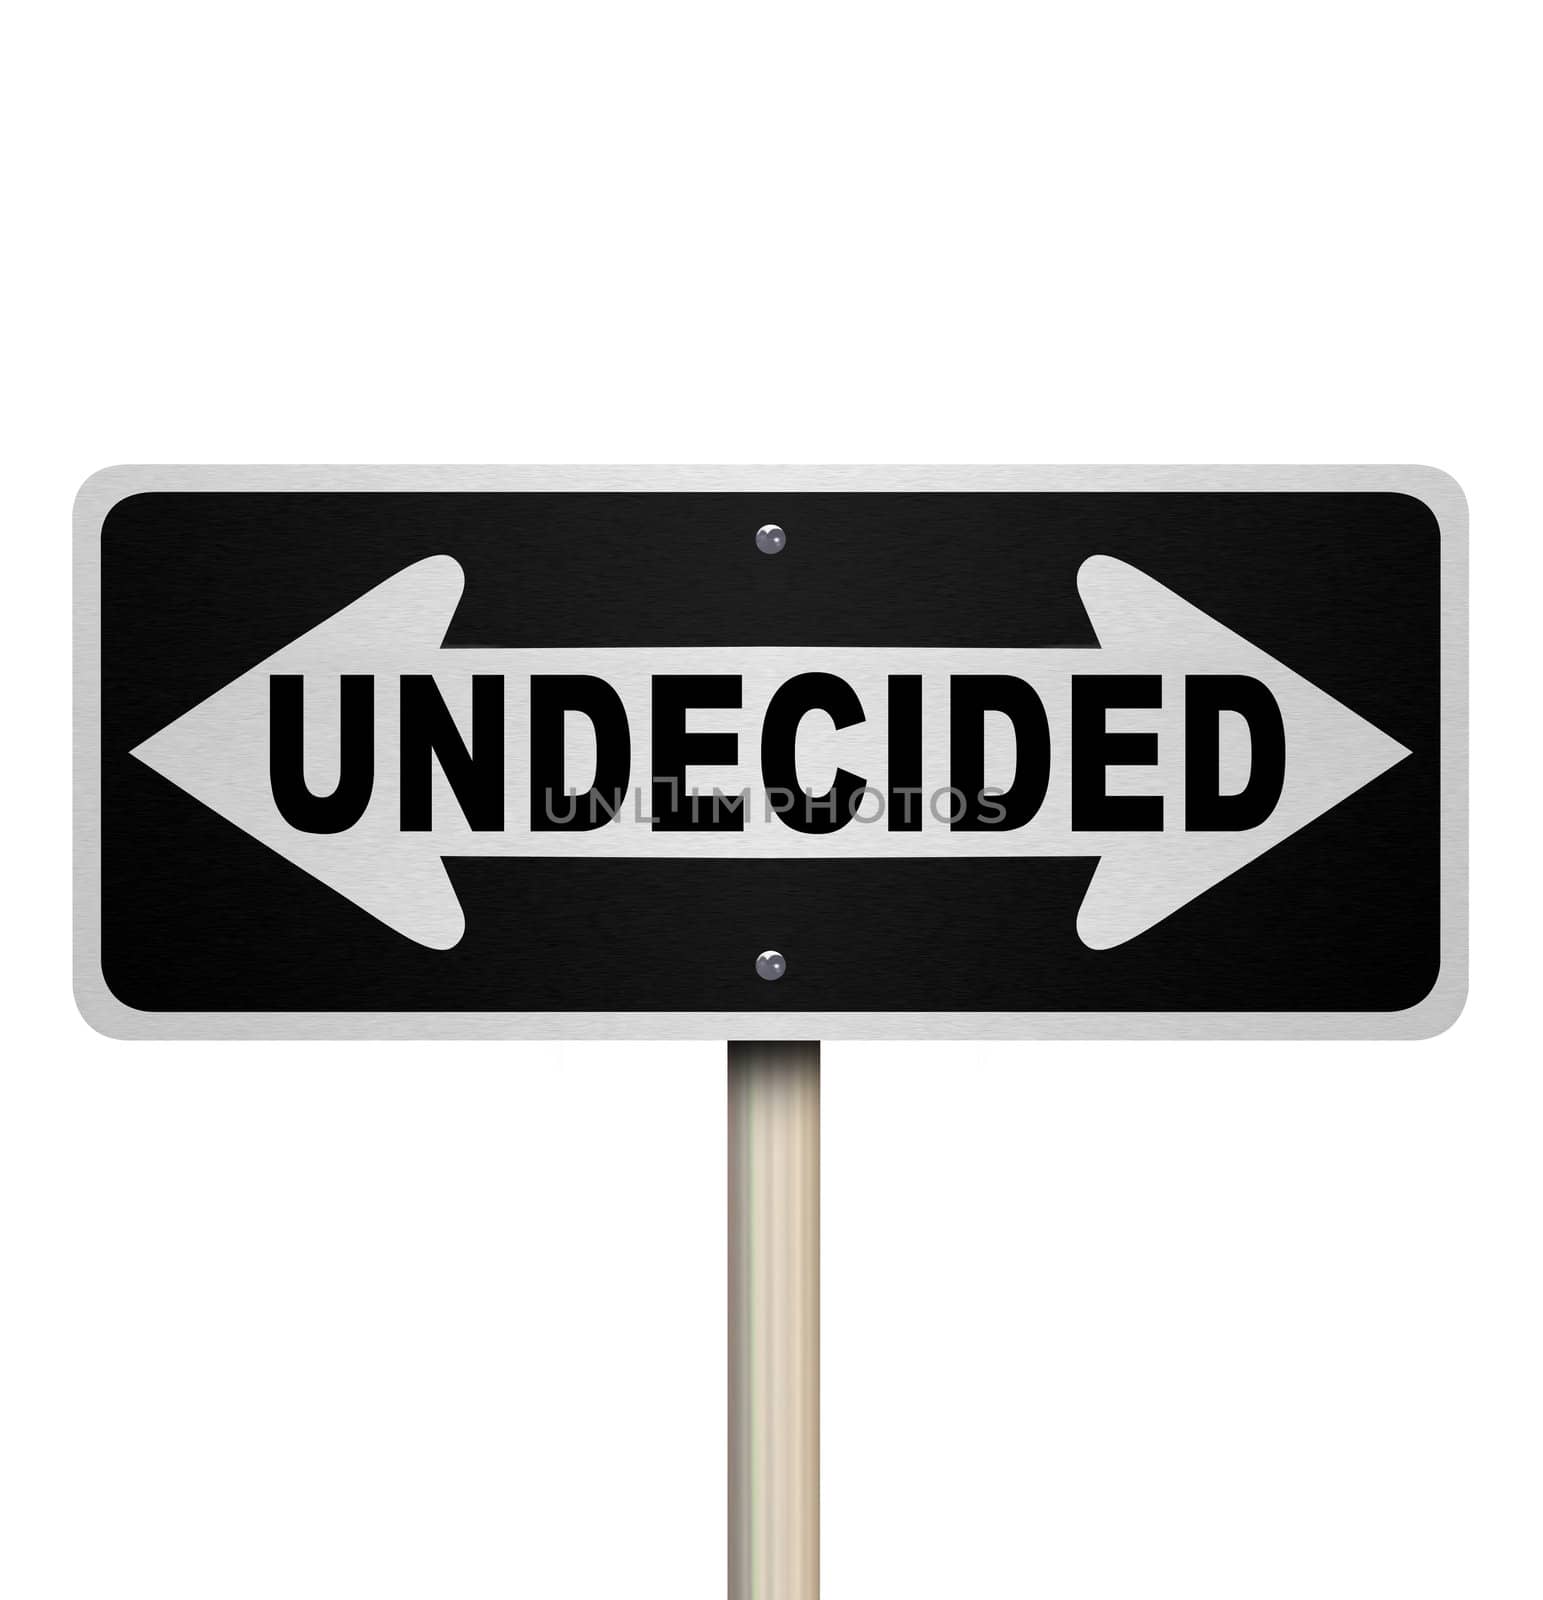 Undecided Word Two-Way Road Sign - Isolated by iQoncept